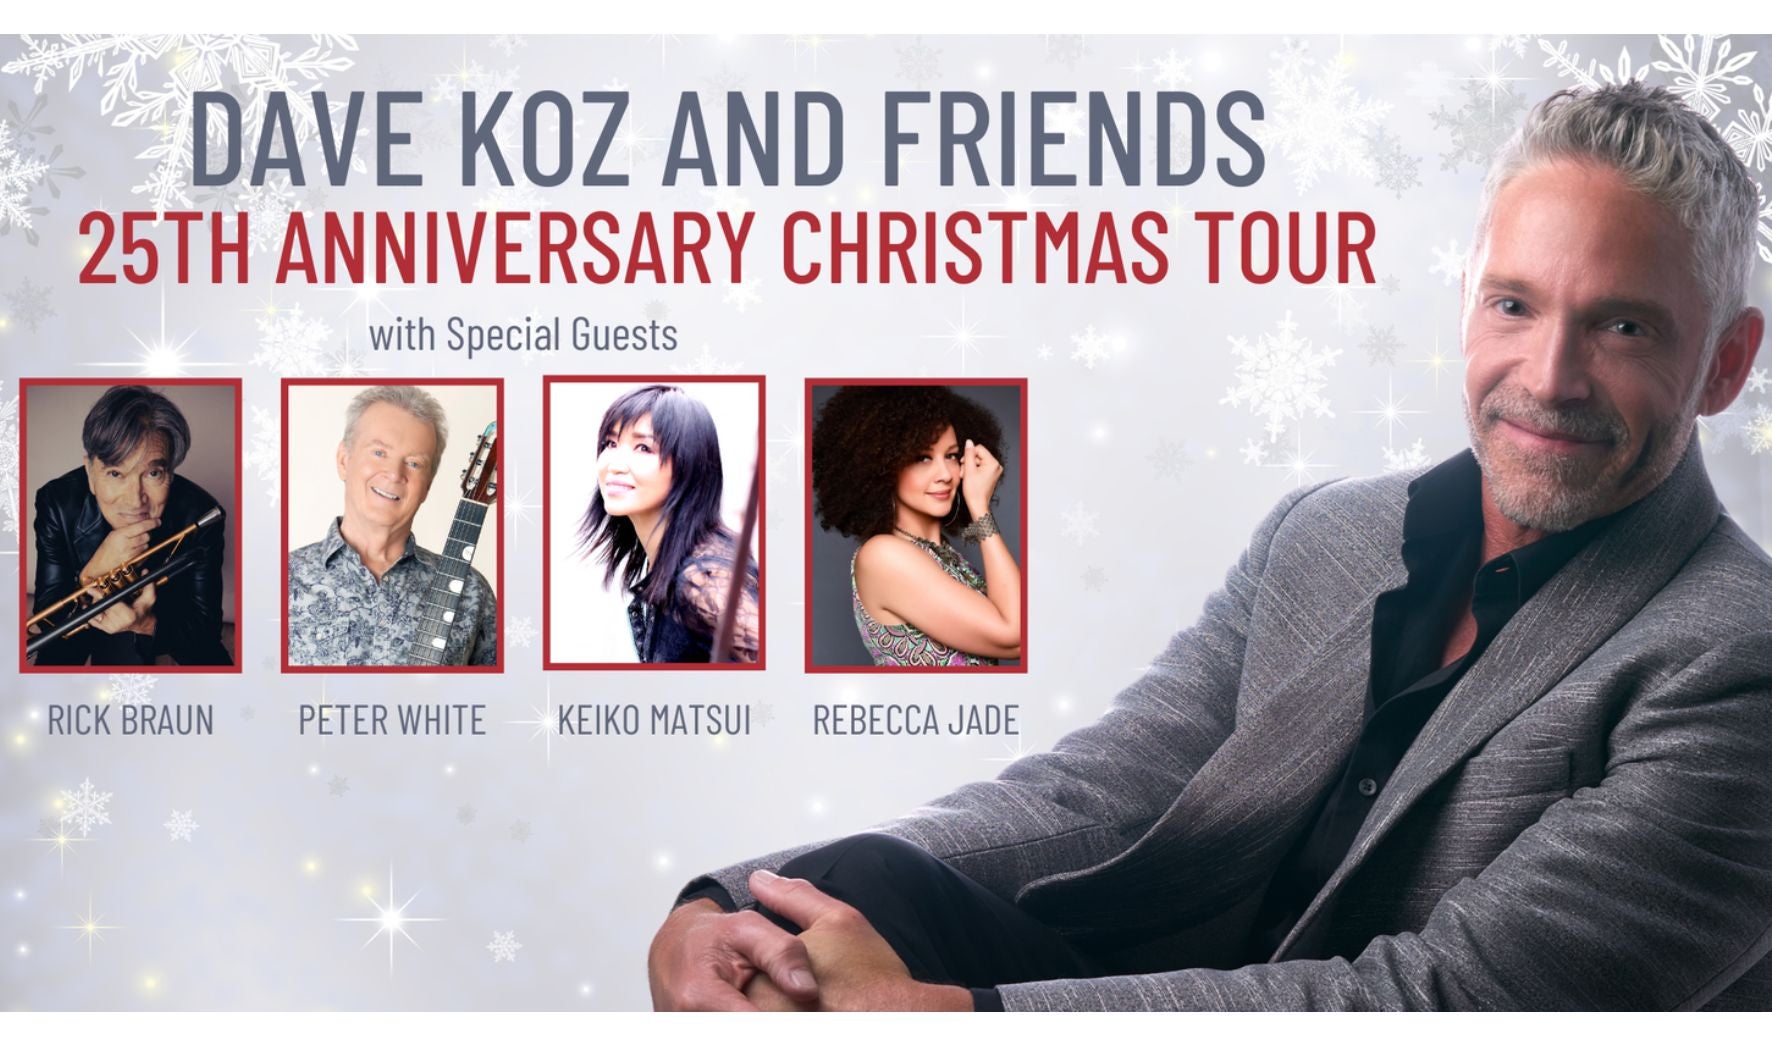 Dave Koz and Friends 25th Anniversary Christmas Tour Columbus